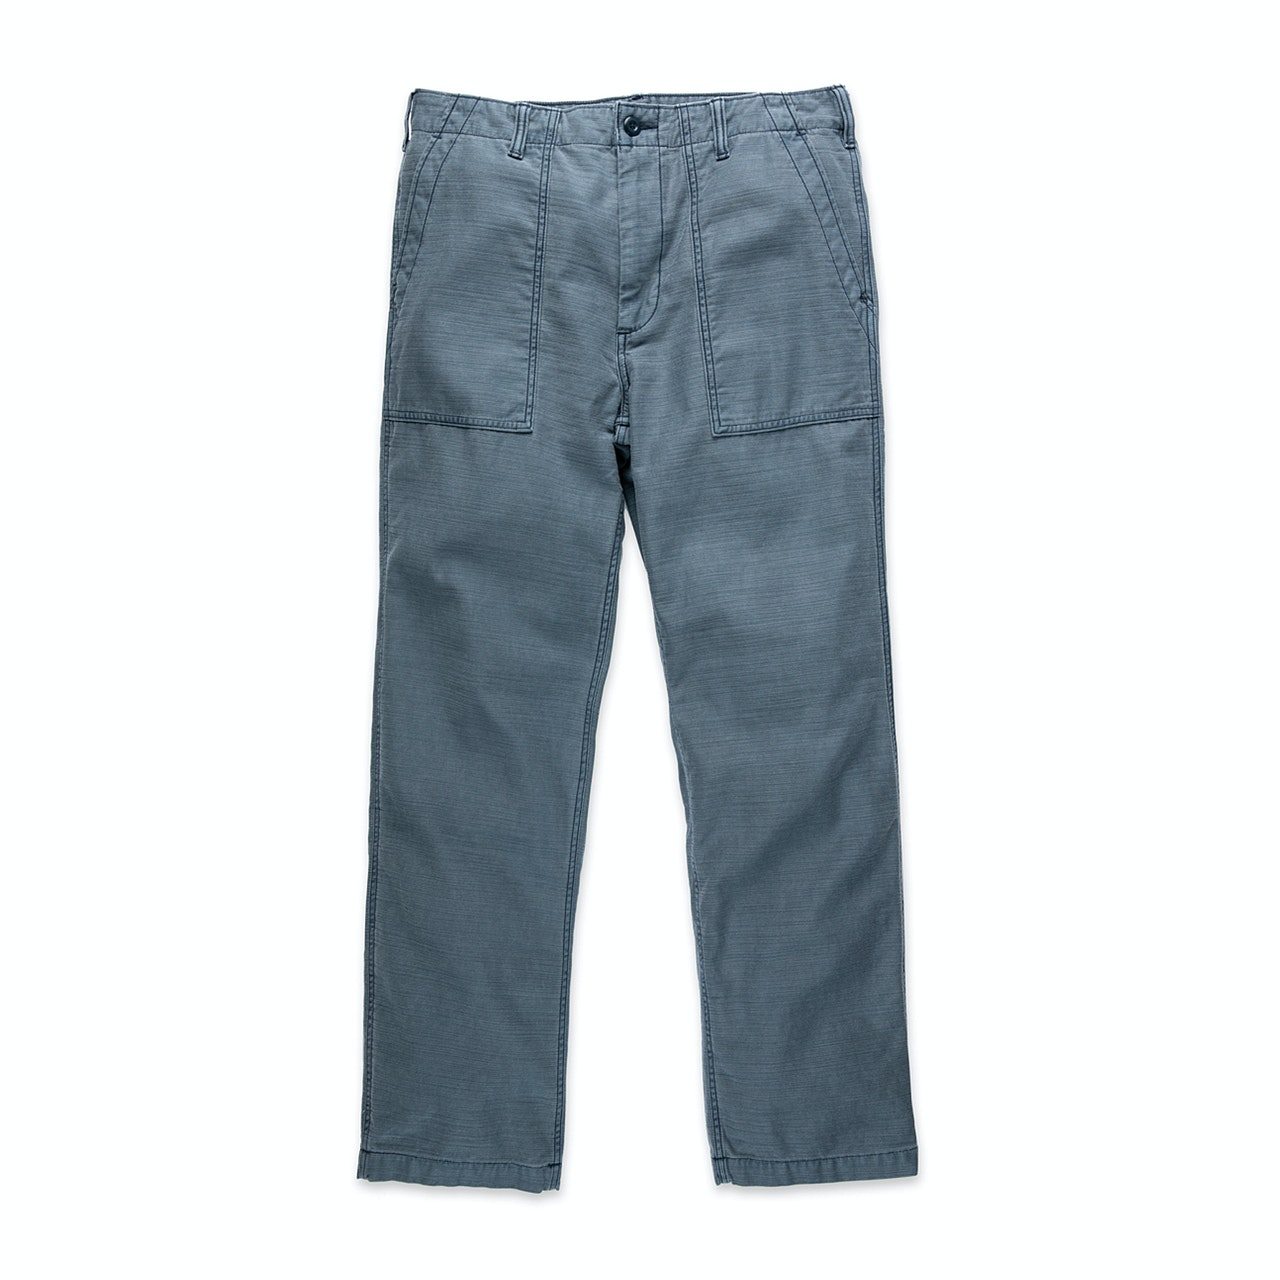 Outerknown Voyager Utility Mens Chino Pant - Atlantic Blue